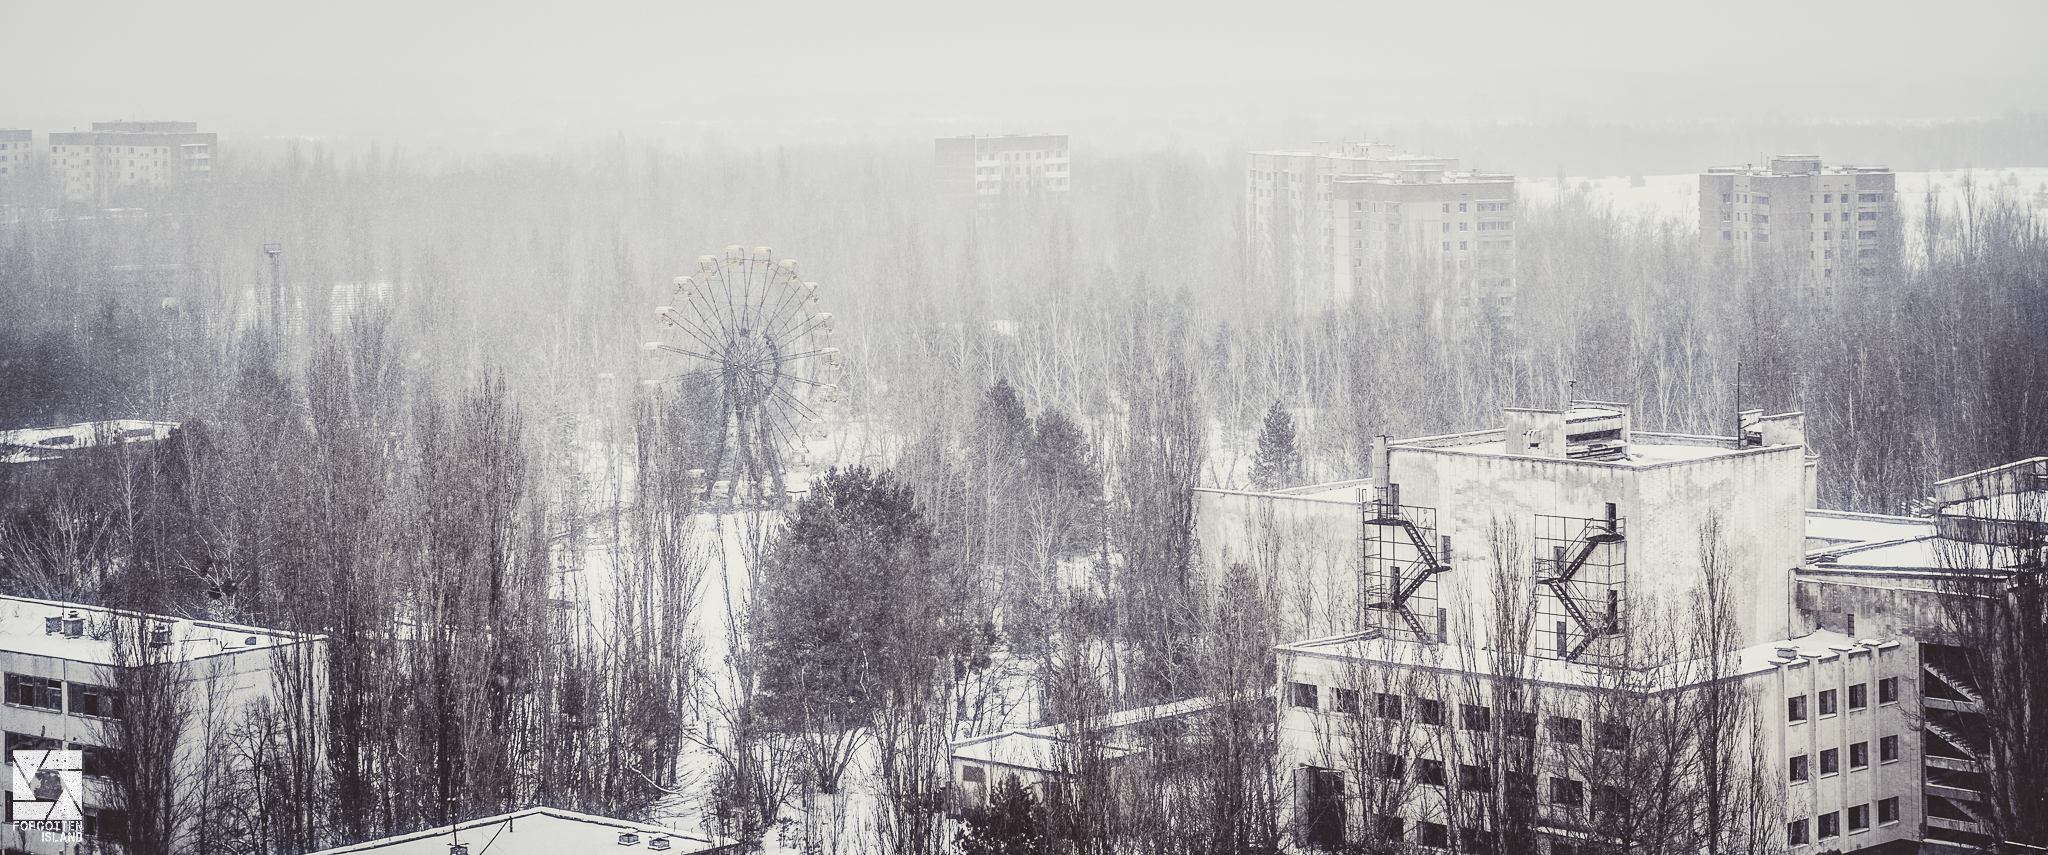 Winter in Pripyat from a rooftop